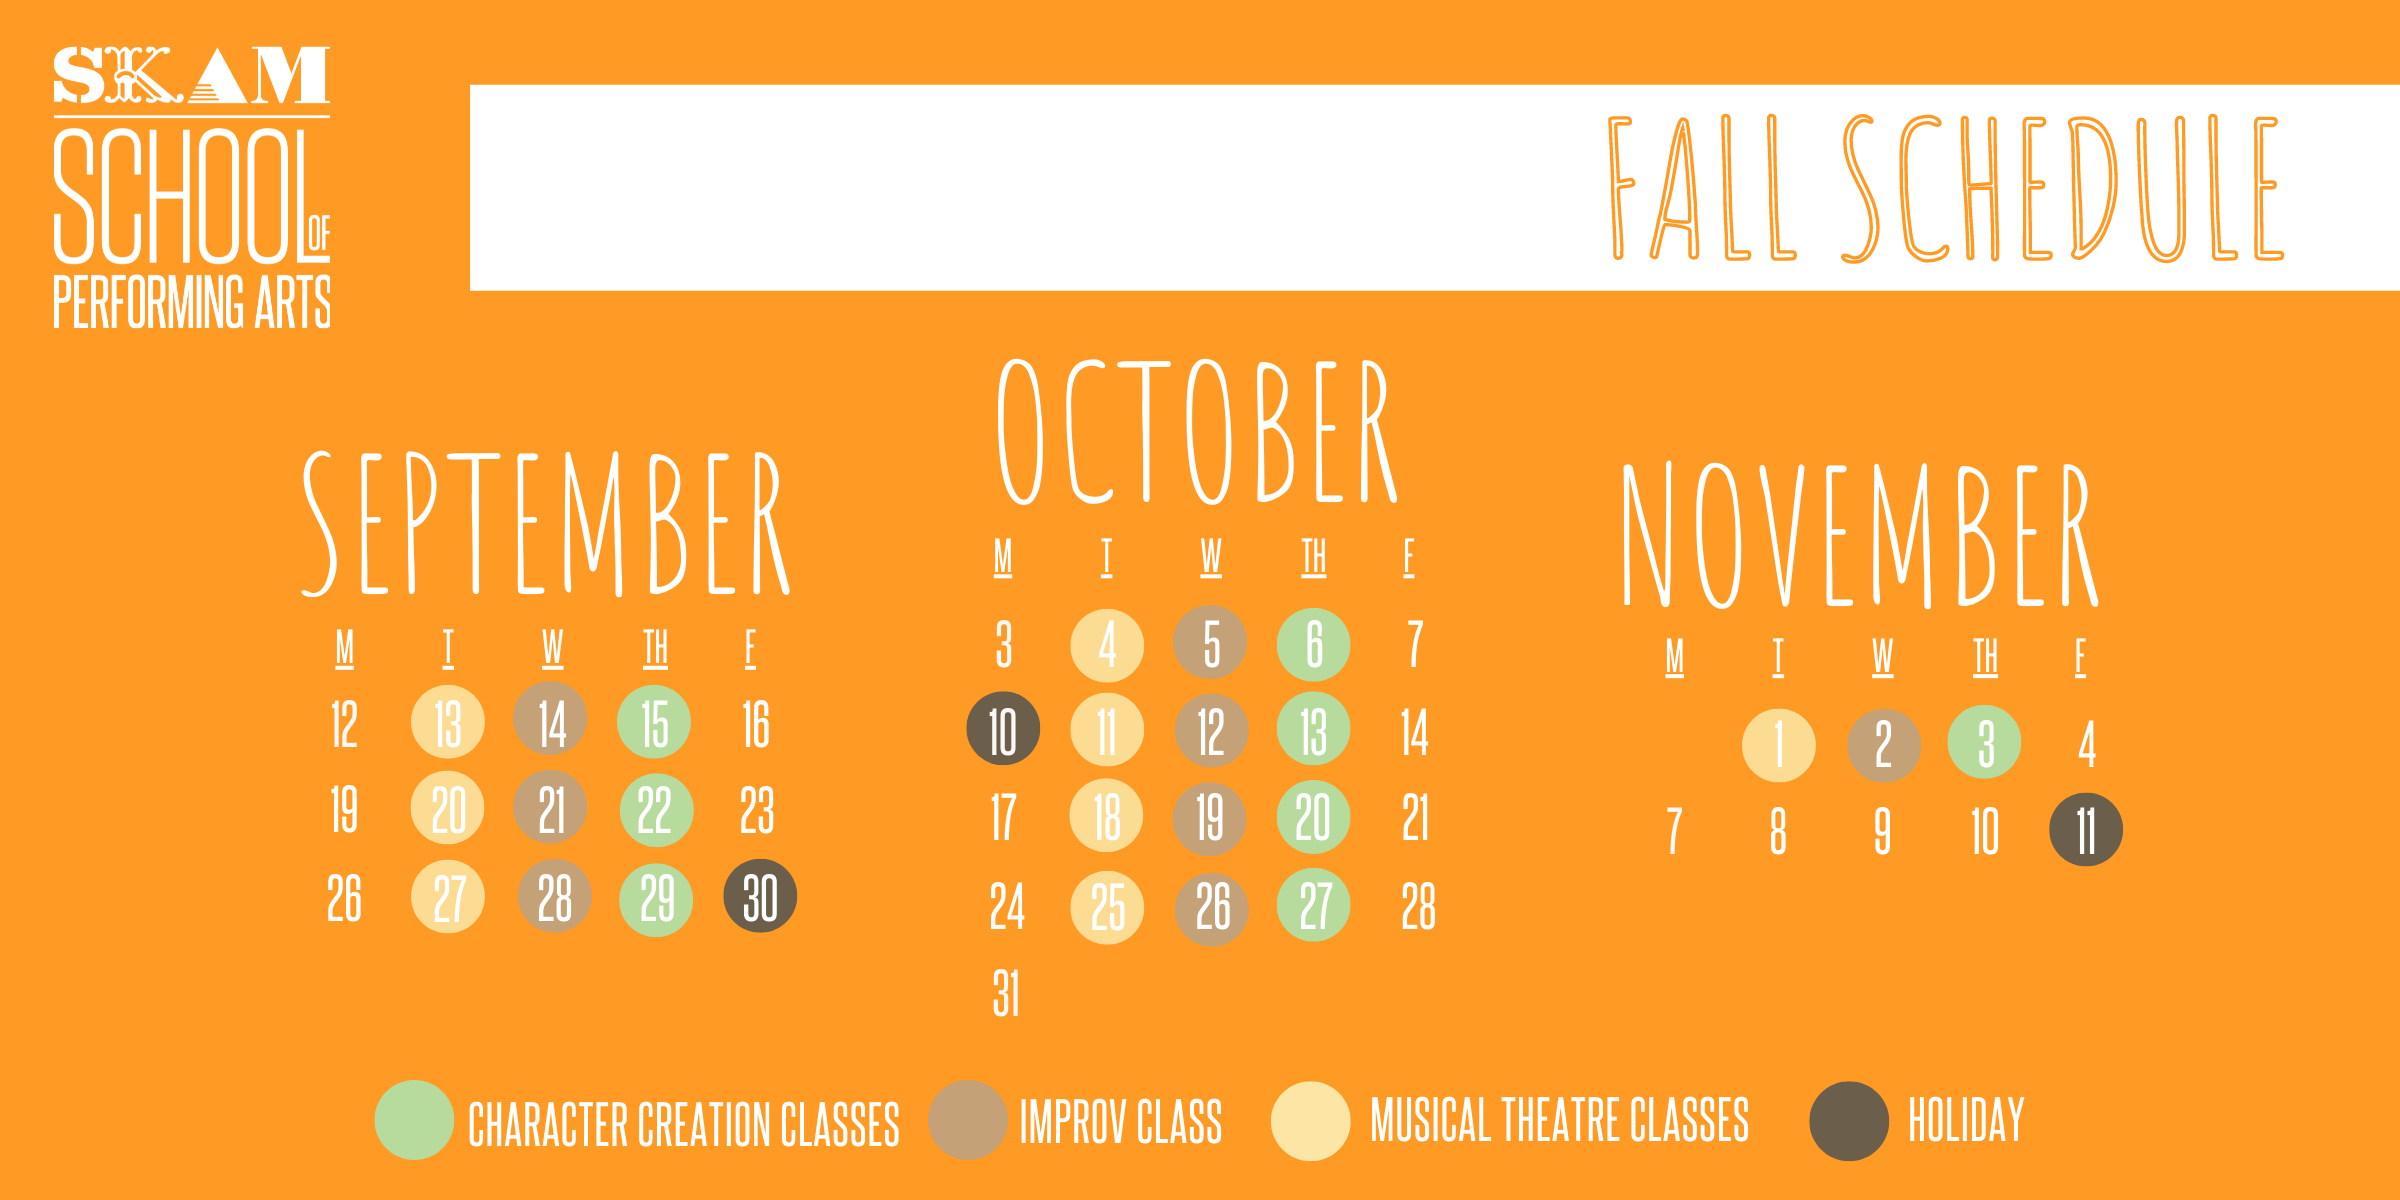 Calendar displaying musical theatre classes on tuesdays, improv on wednesdays, and character creation on thursdays.